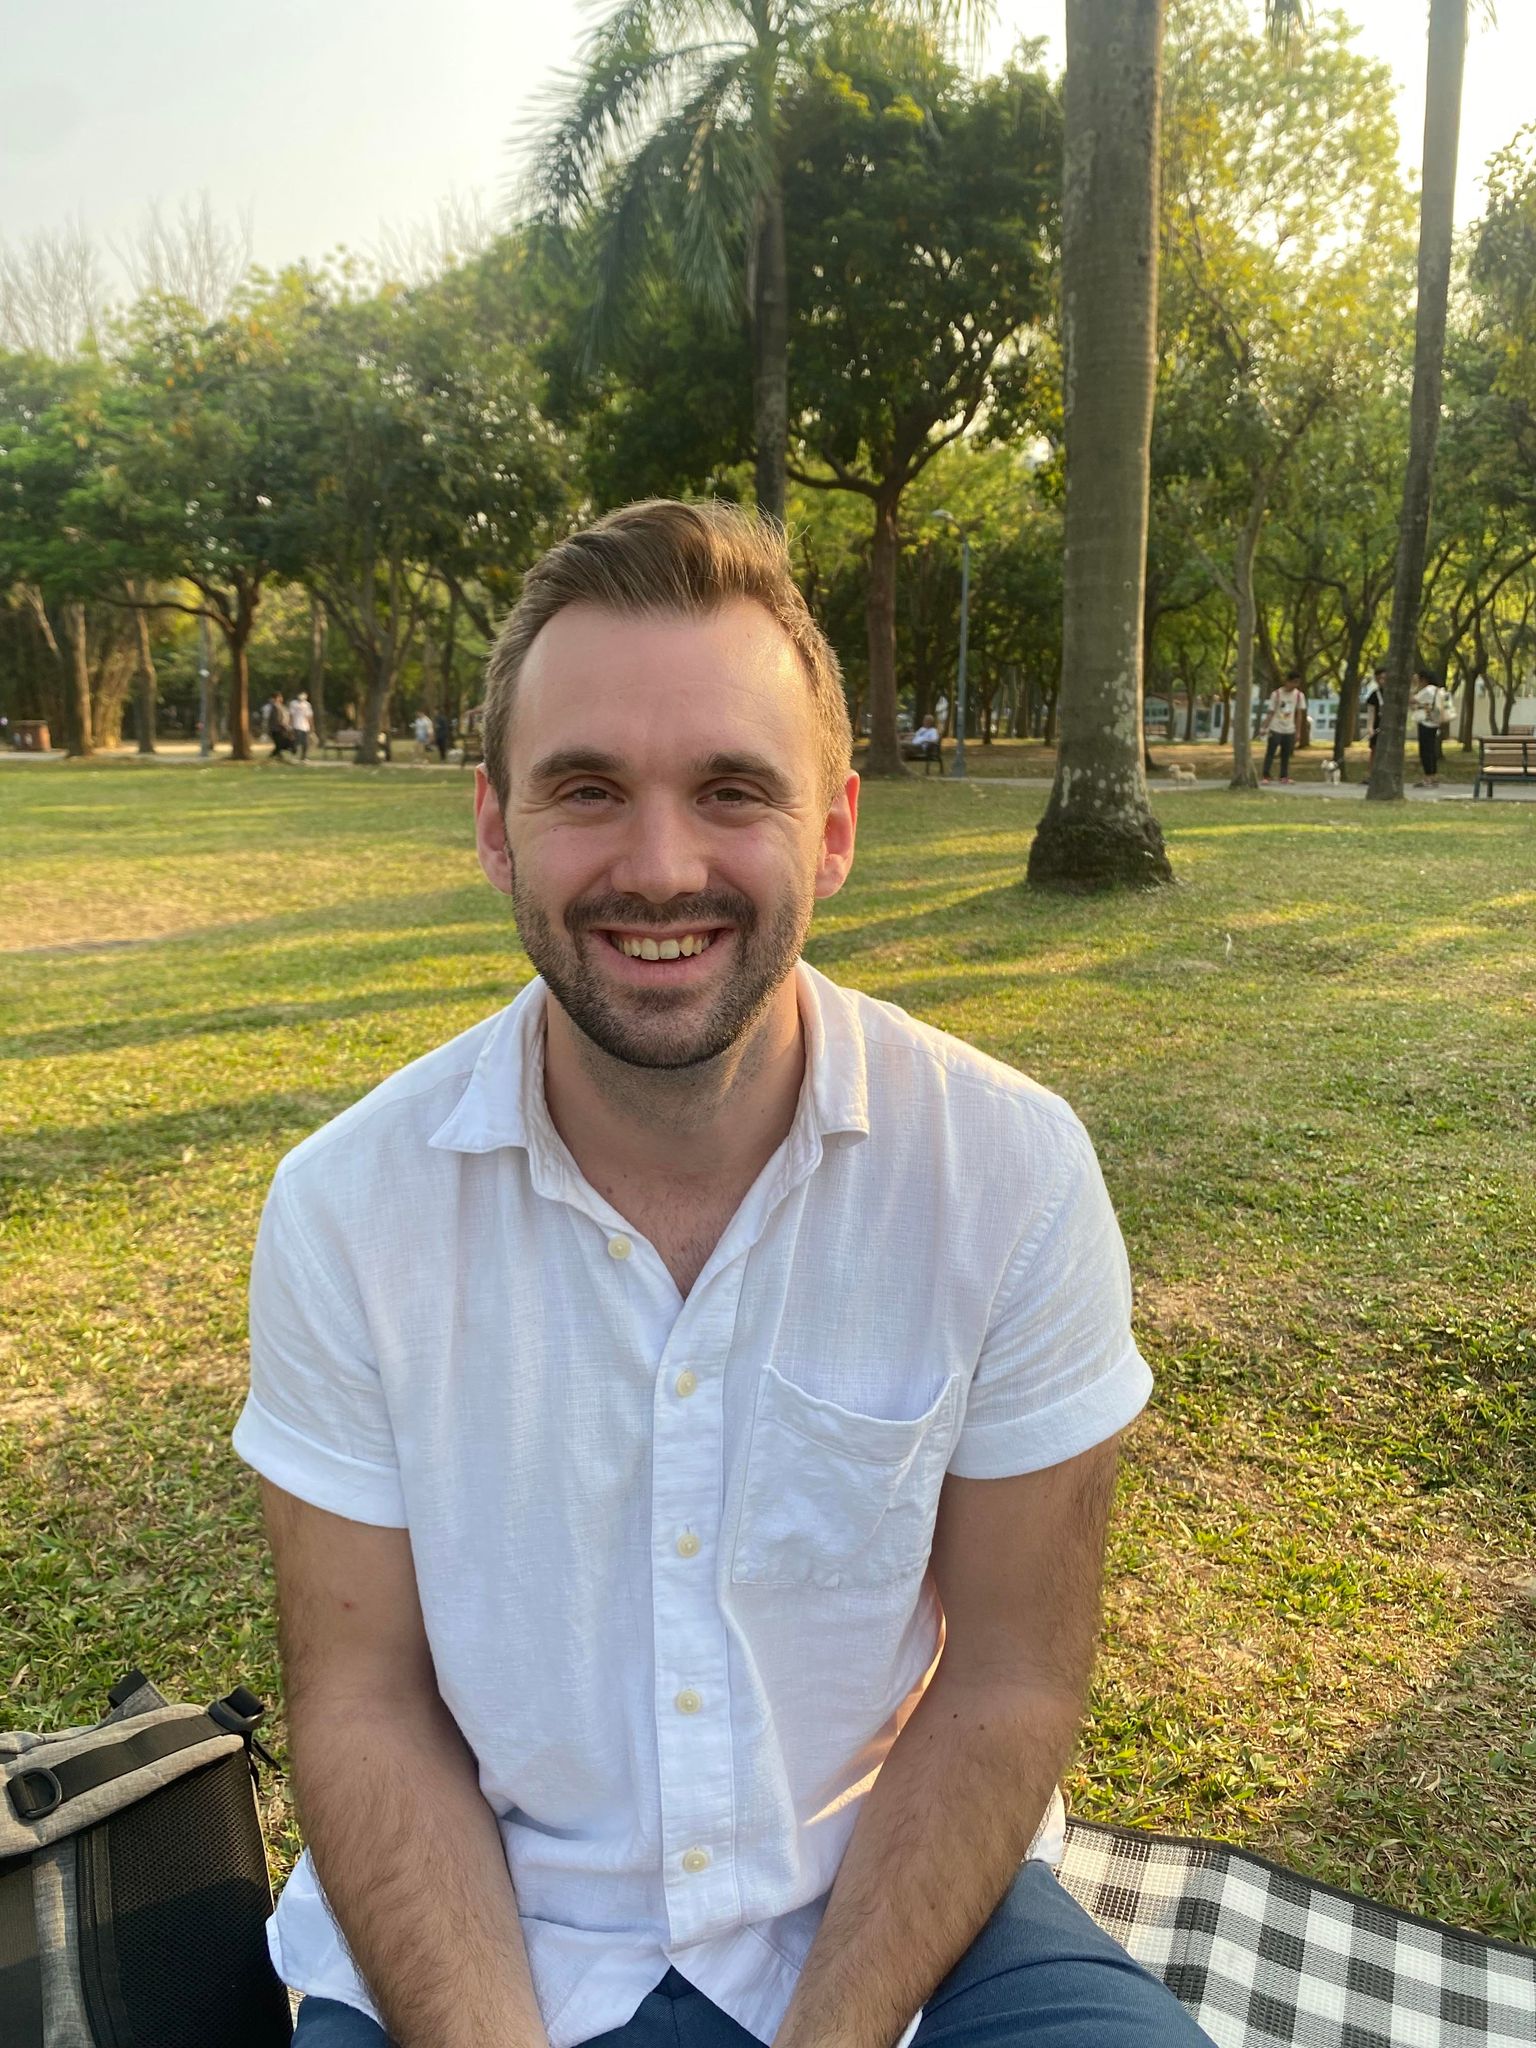 Teaching English and Living in Taiwan Tutors of Chinese Wanted  華語教學工作機會, Intermediate Mandarin Speaker Wants to Have a Native Taiwanese Accent and Fluency image